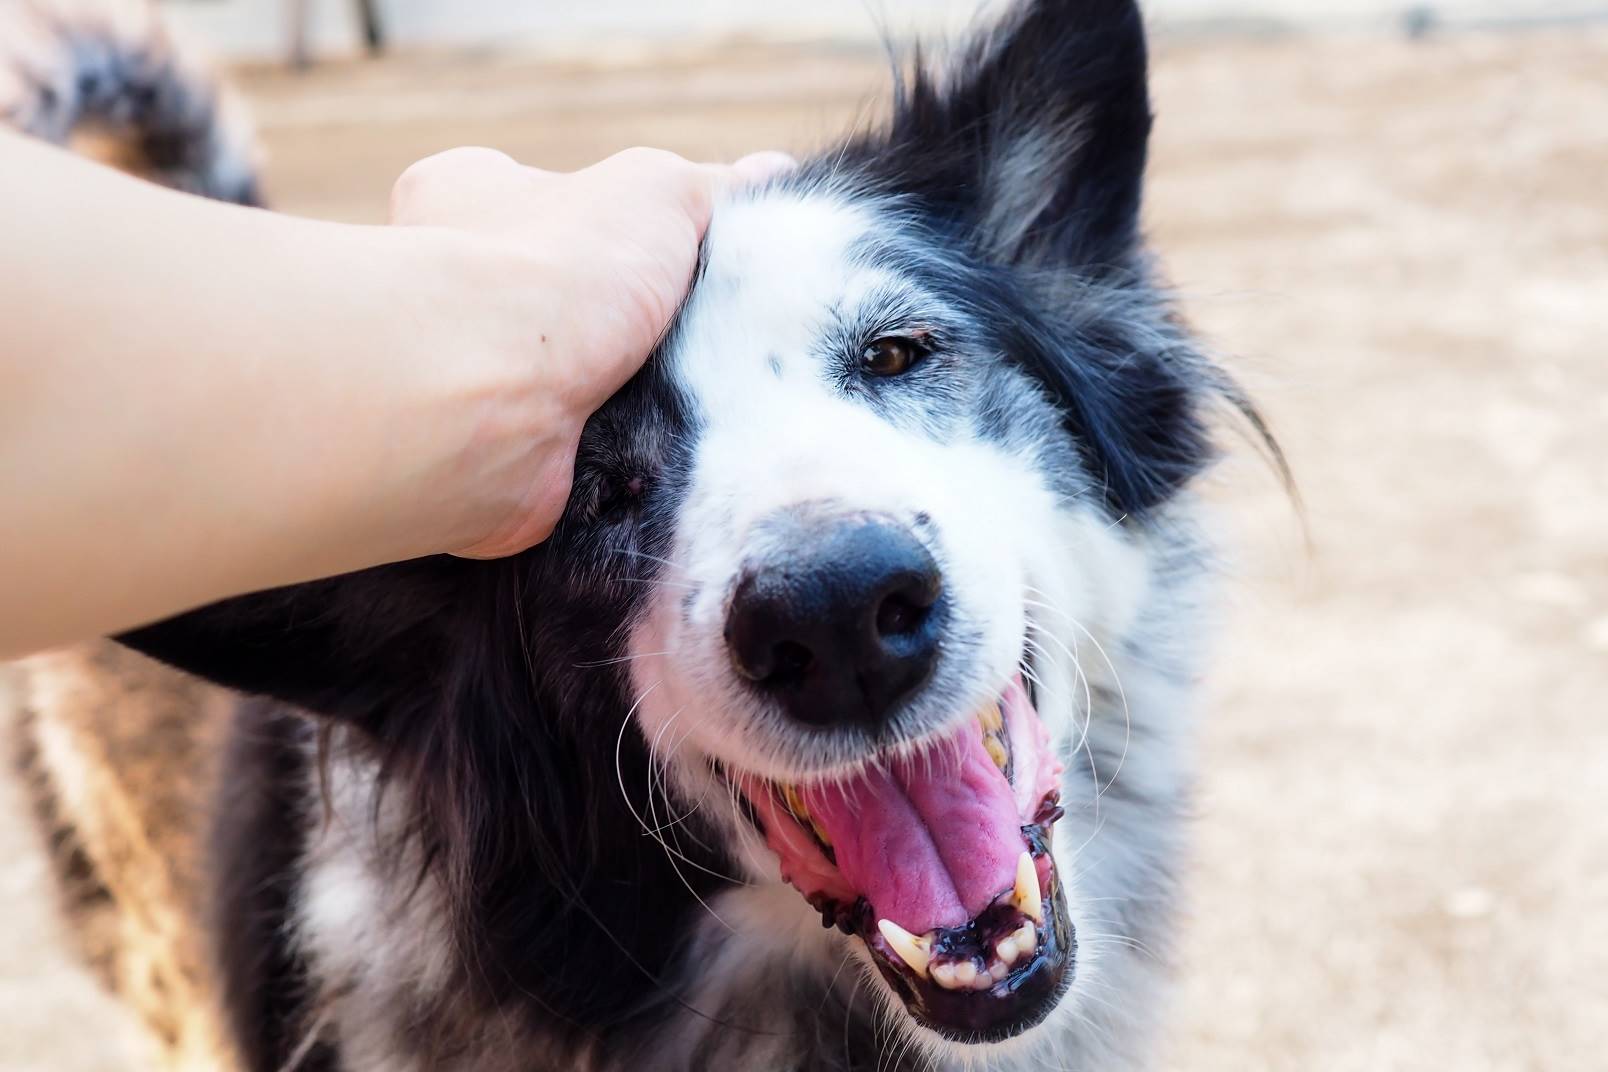 Pets feel the stress experienced by humans. Photo: Supplied